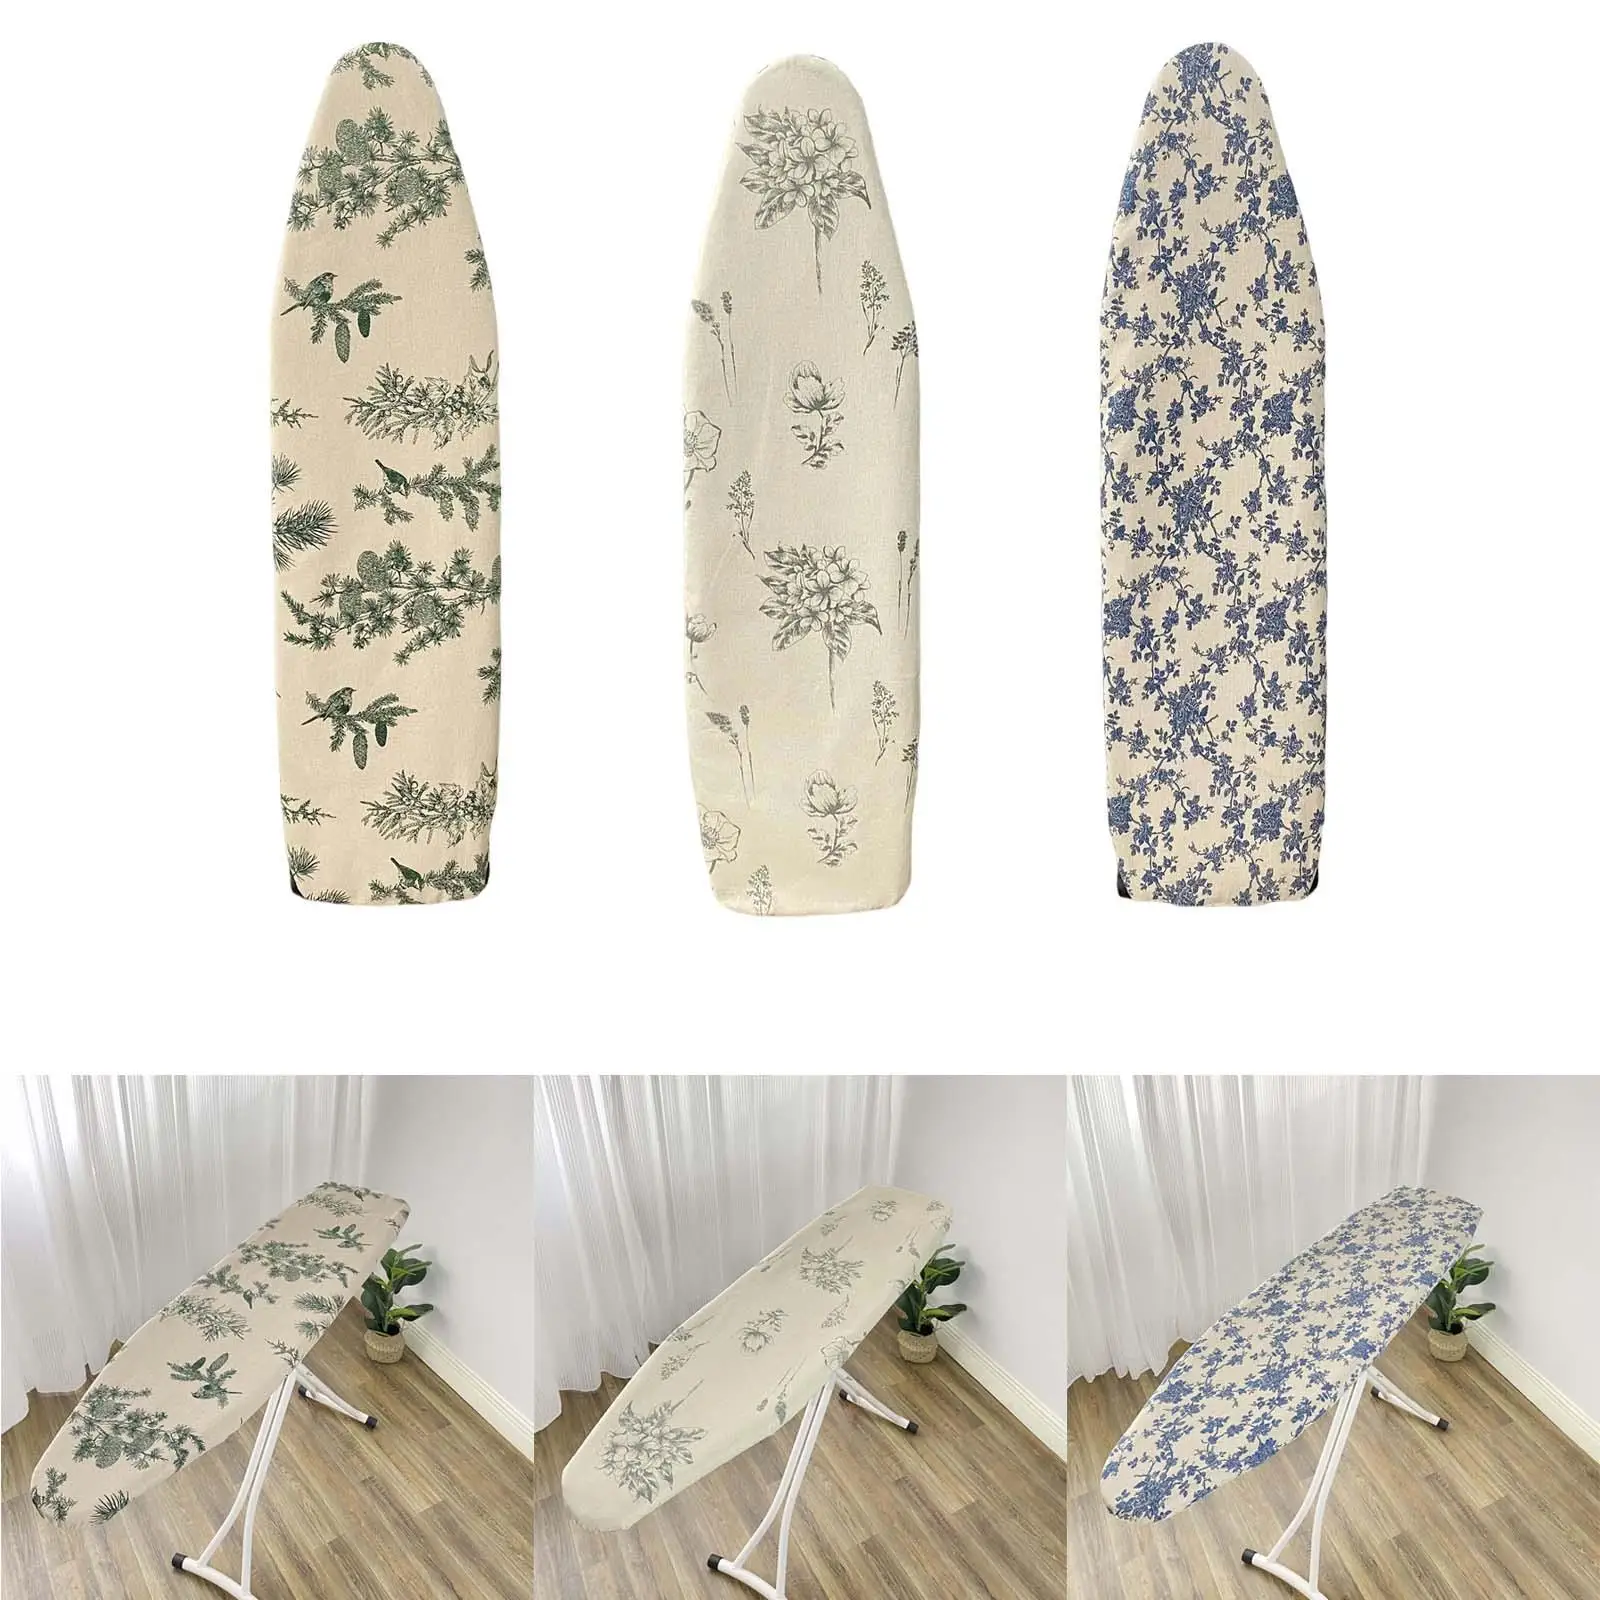 Ironing Table Cover Protector Easy to Install Durable Heat Resistant Washable Reusable Foldable Ironing Board Cover for Travel